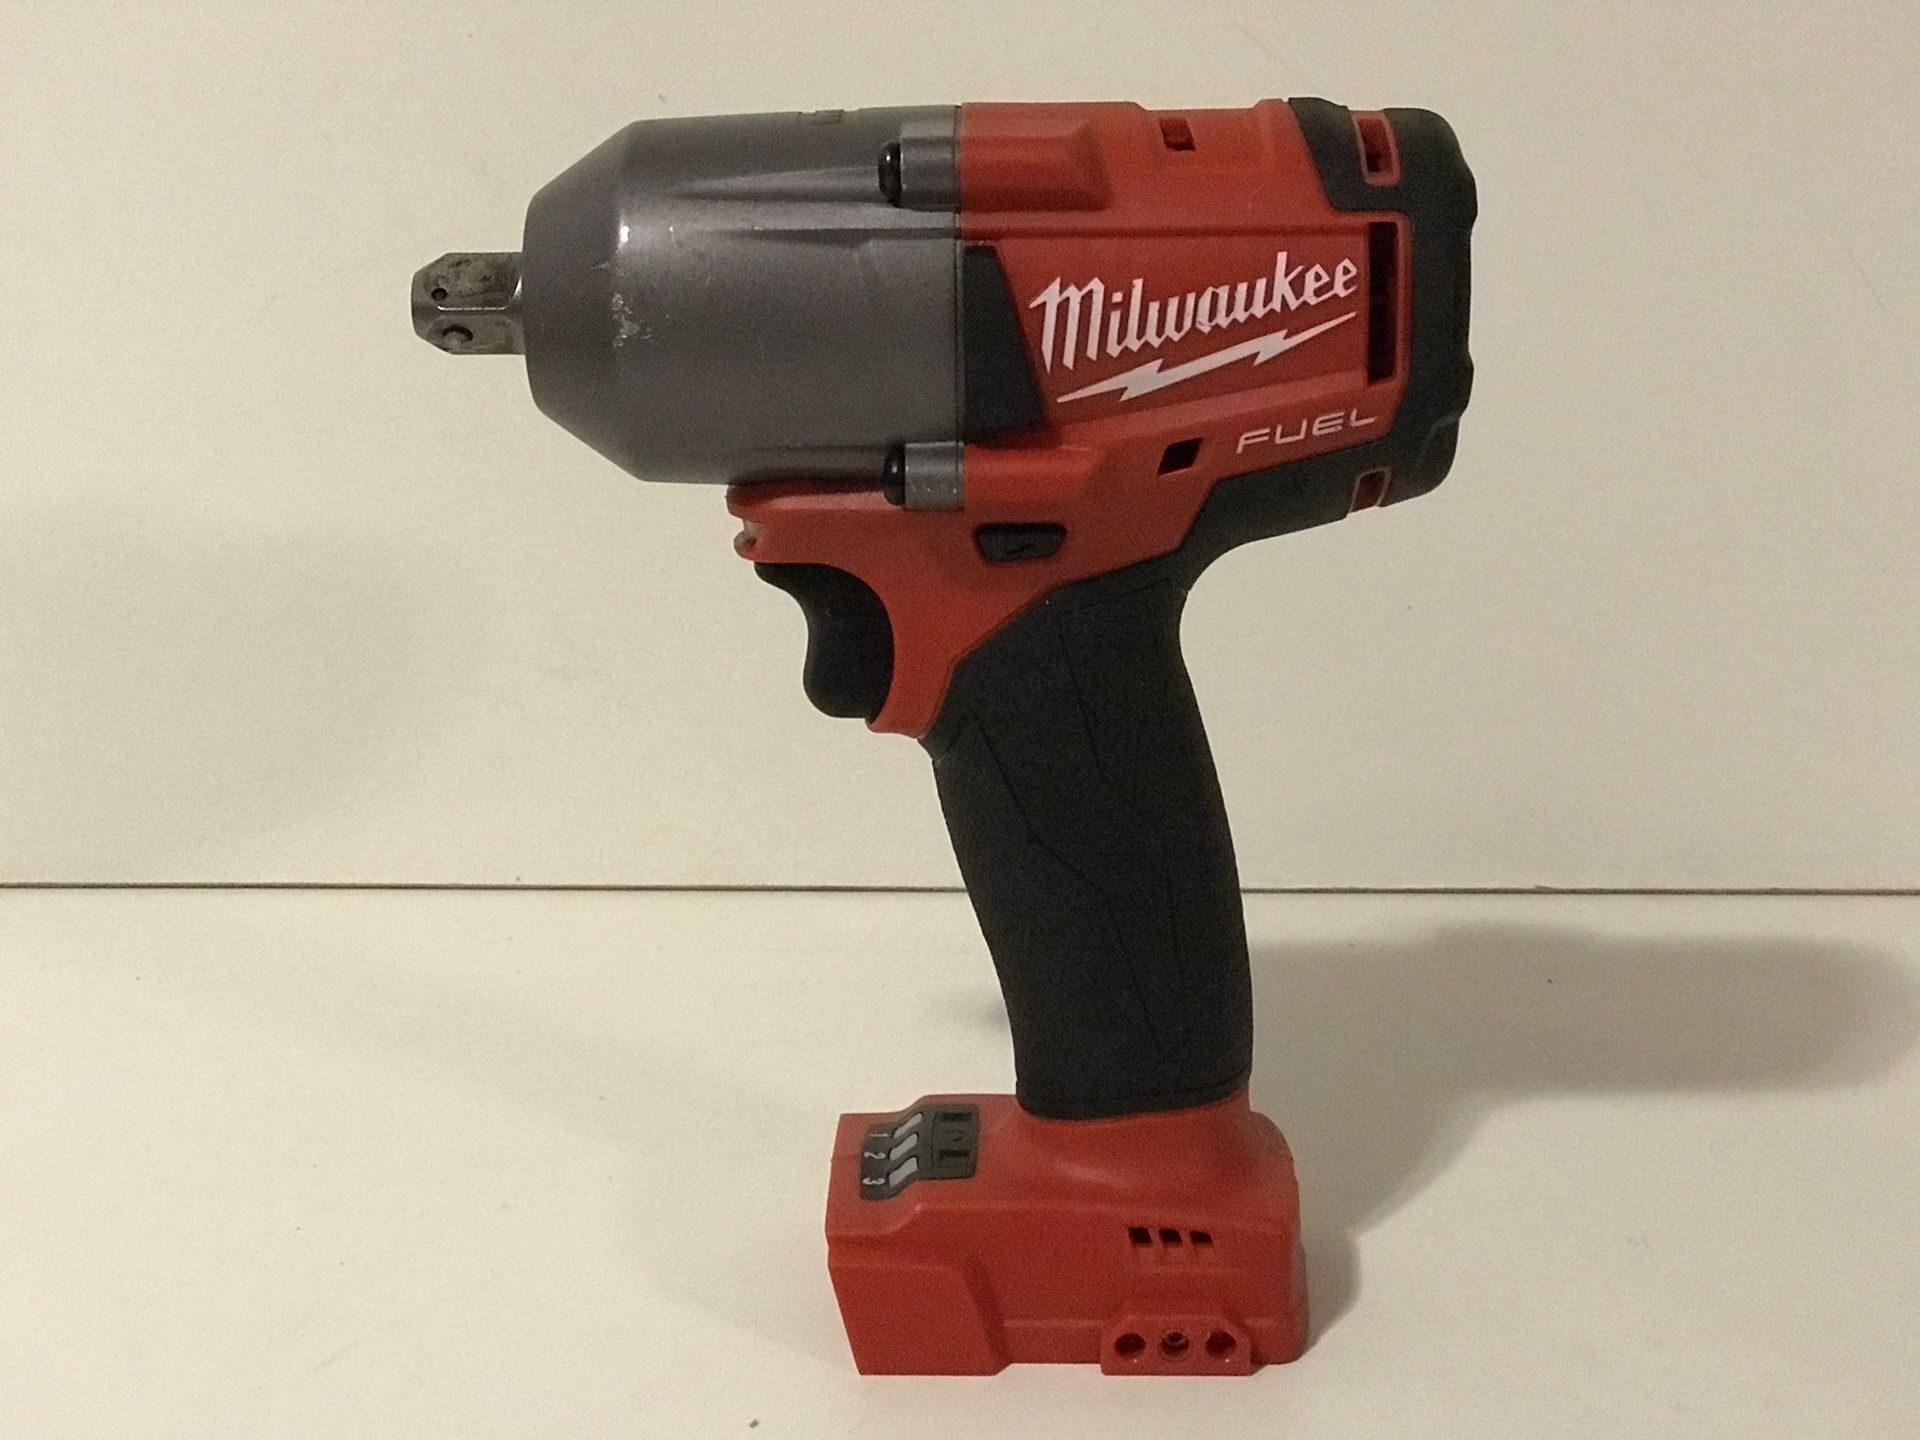 MILWAUKEE M18 FUEL CORDLESS 1/2in IMPACT WRENCH MID TORQUE NO BATTERY OR CHARGER INCLUDED TOOL ONLY SOLO LA HERRAMIENTA